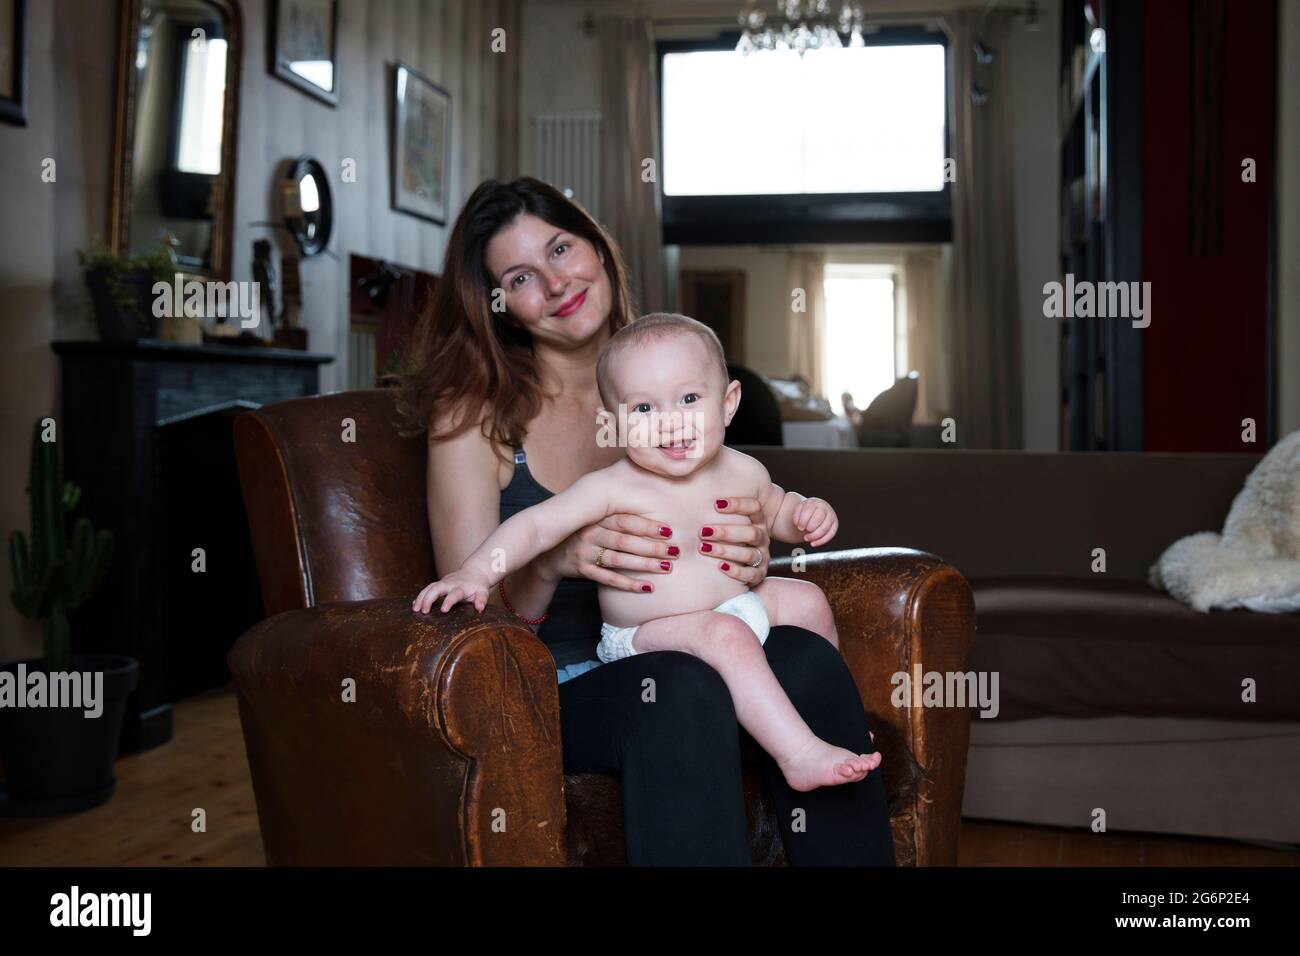 A woman with her baby on her lap Stock Photo